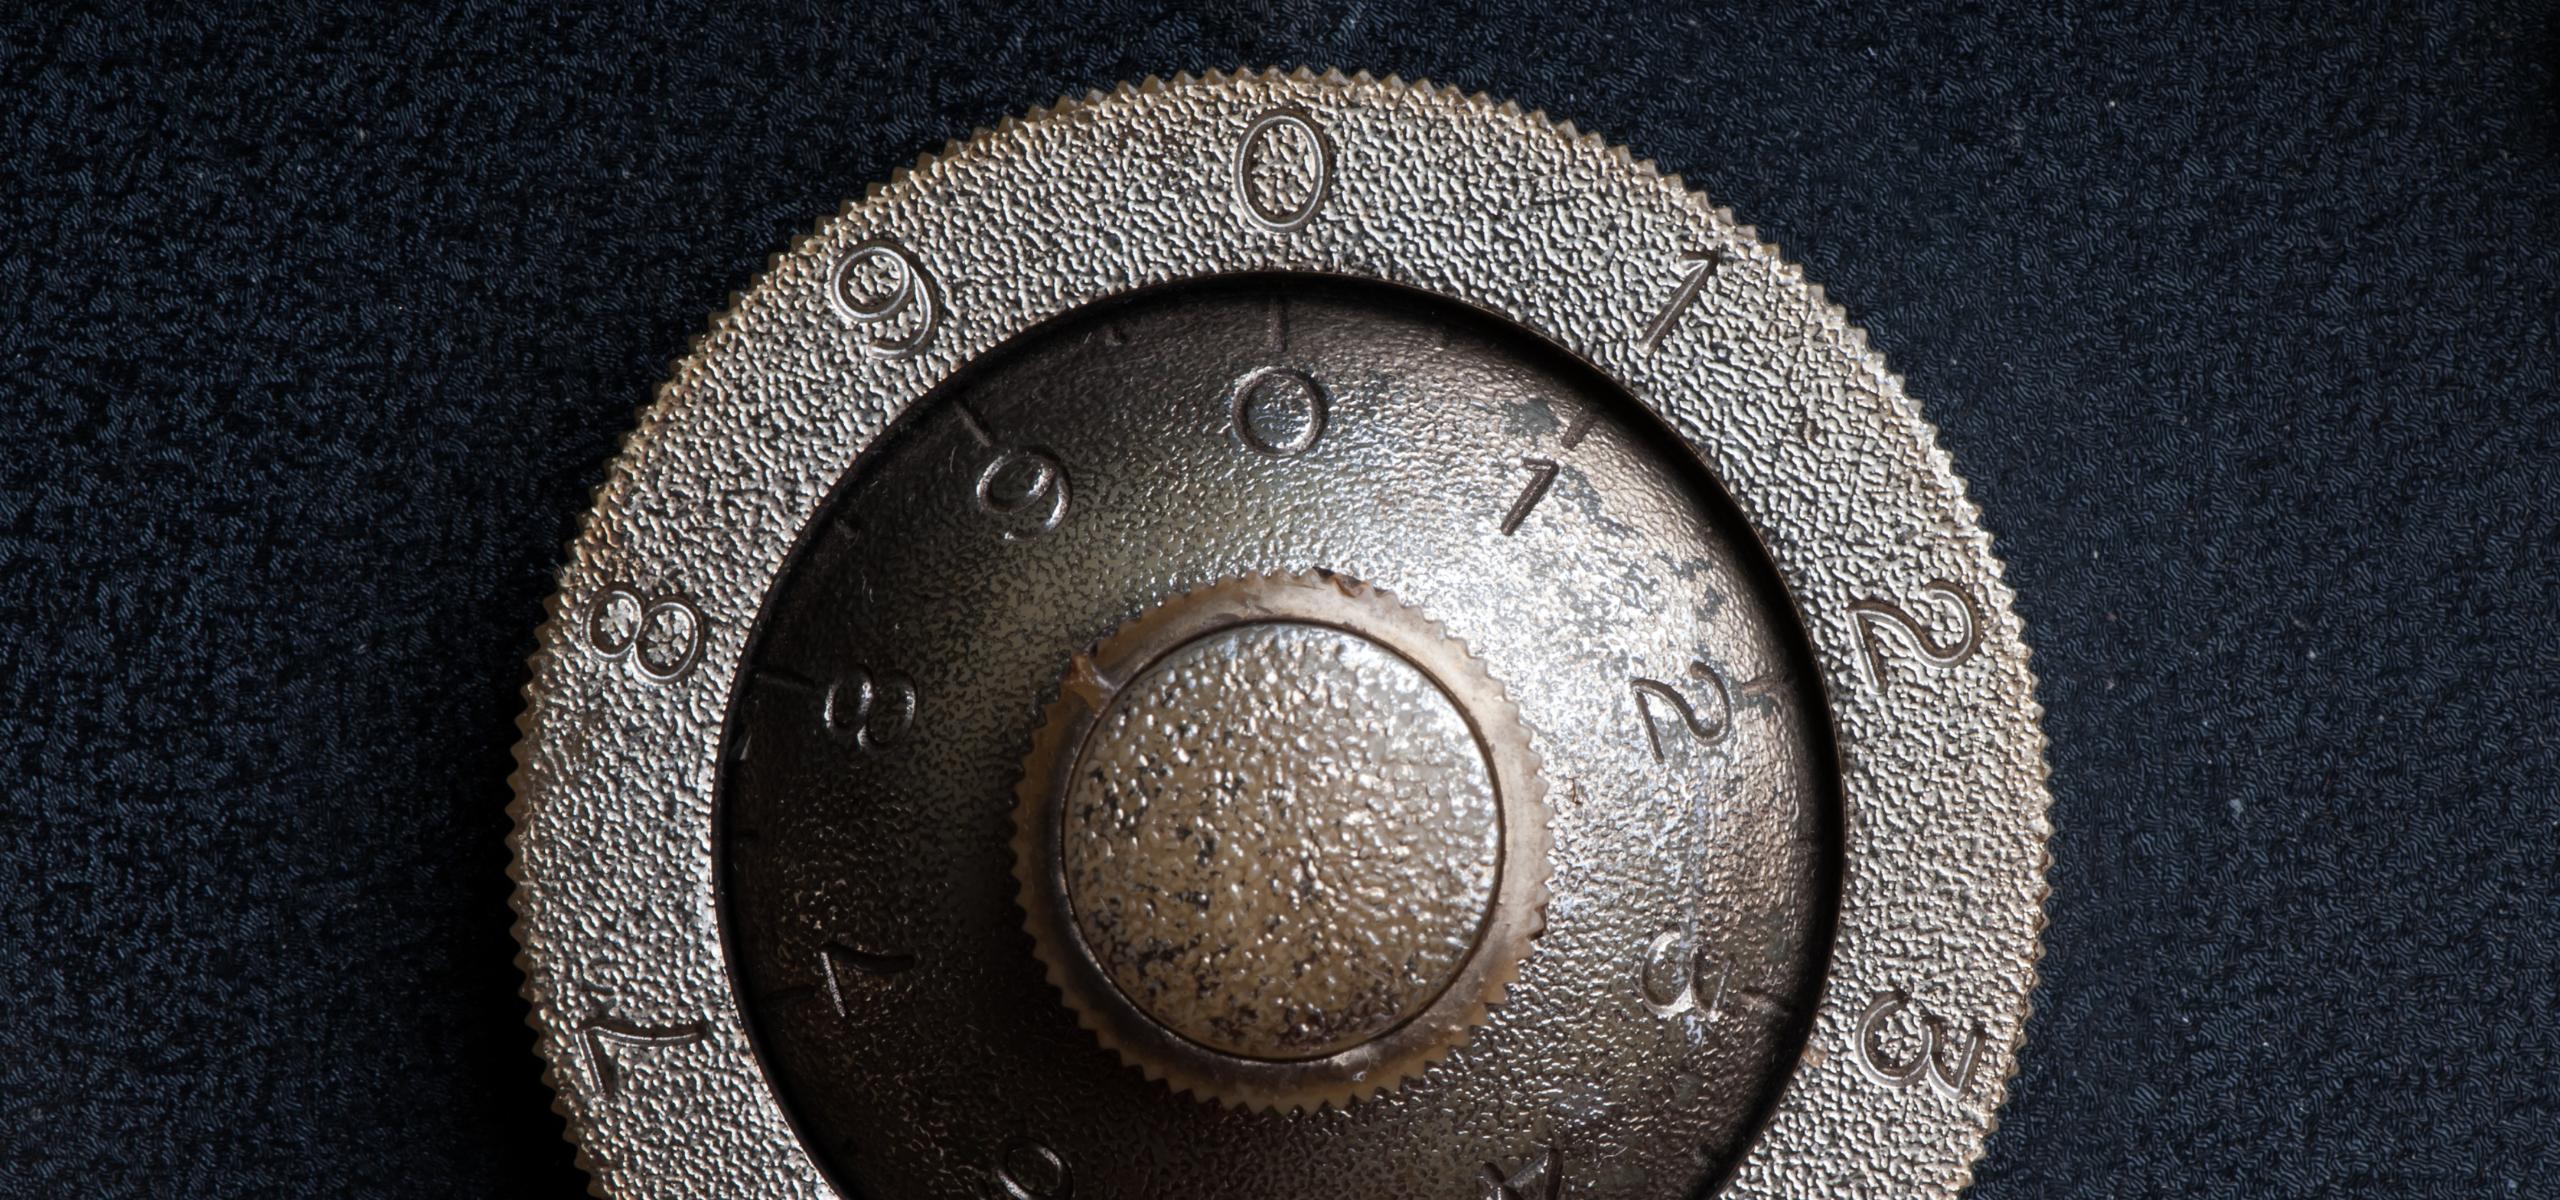 Image of an old safe for history of safes